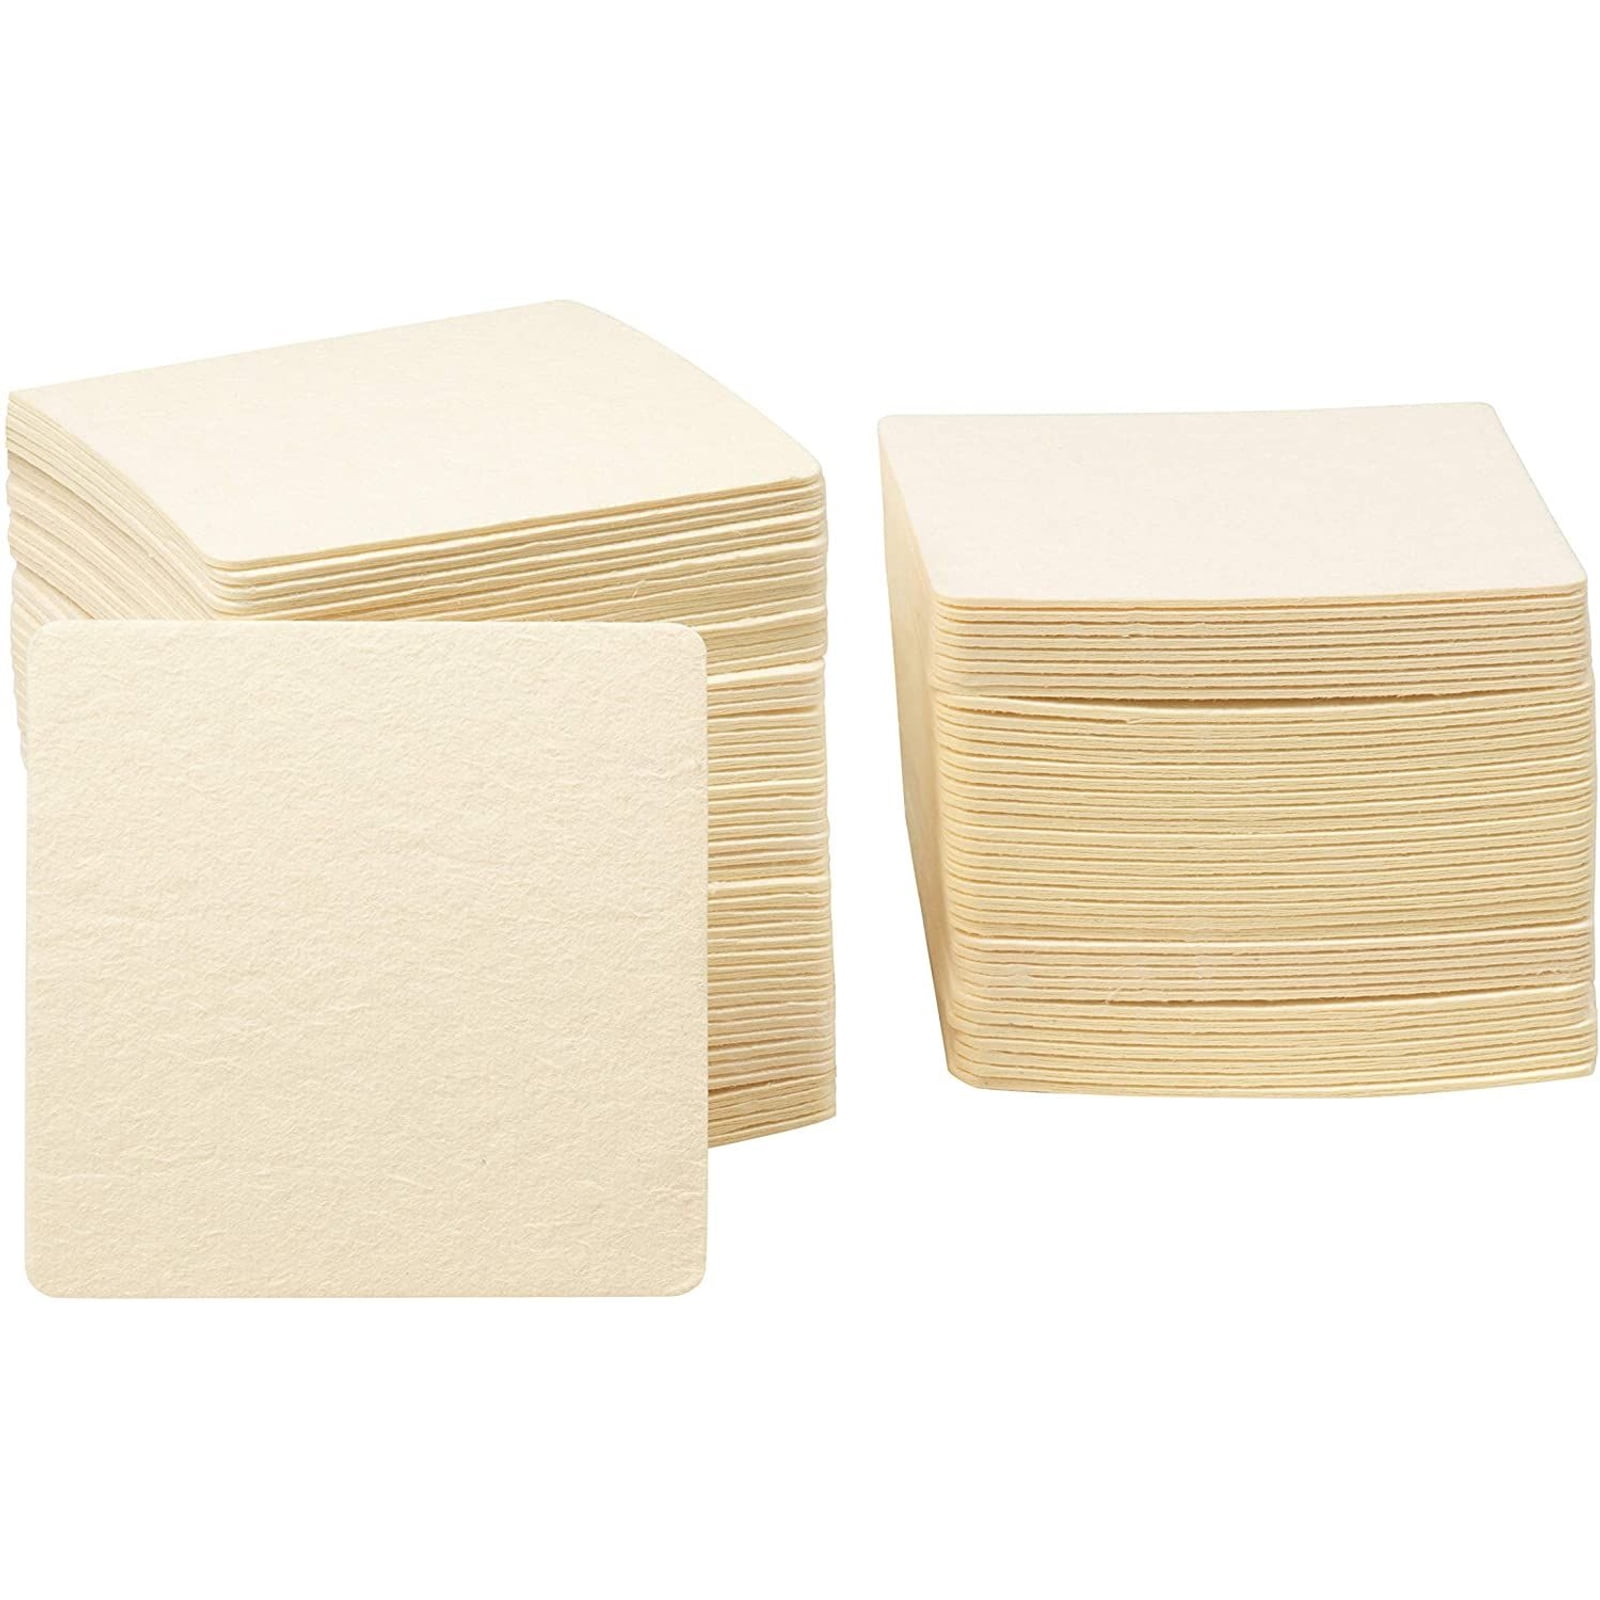 MT Products 4” Blank Off-White Heavyweight Cardboard Square Coasters for Your Beverages 2 MM Thickness 100 Pieces